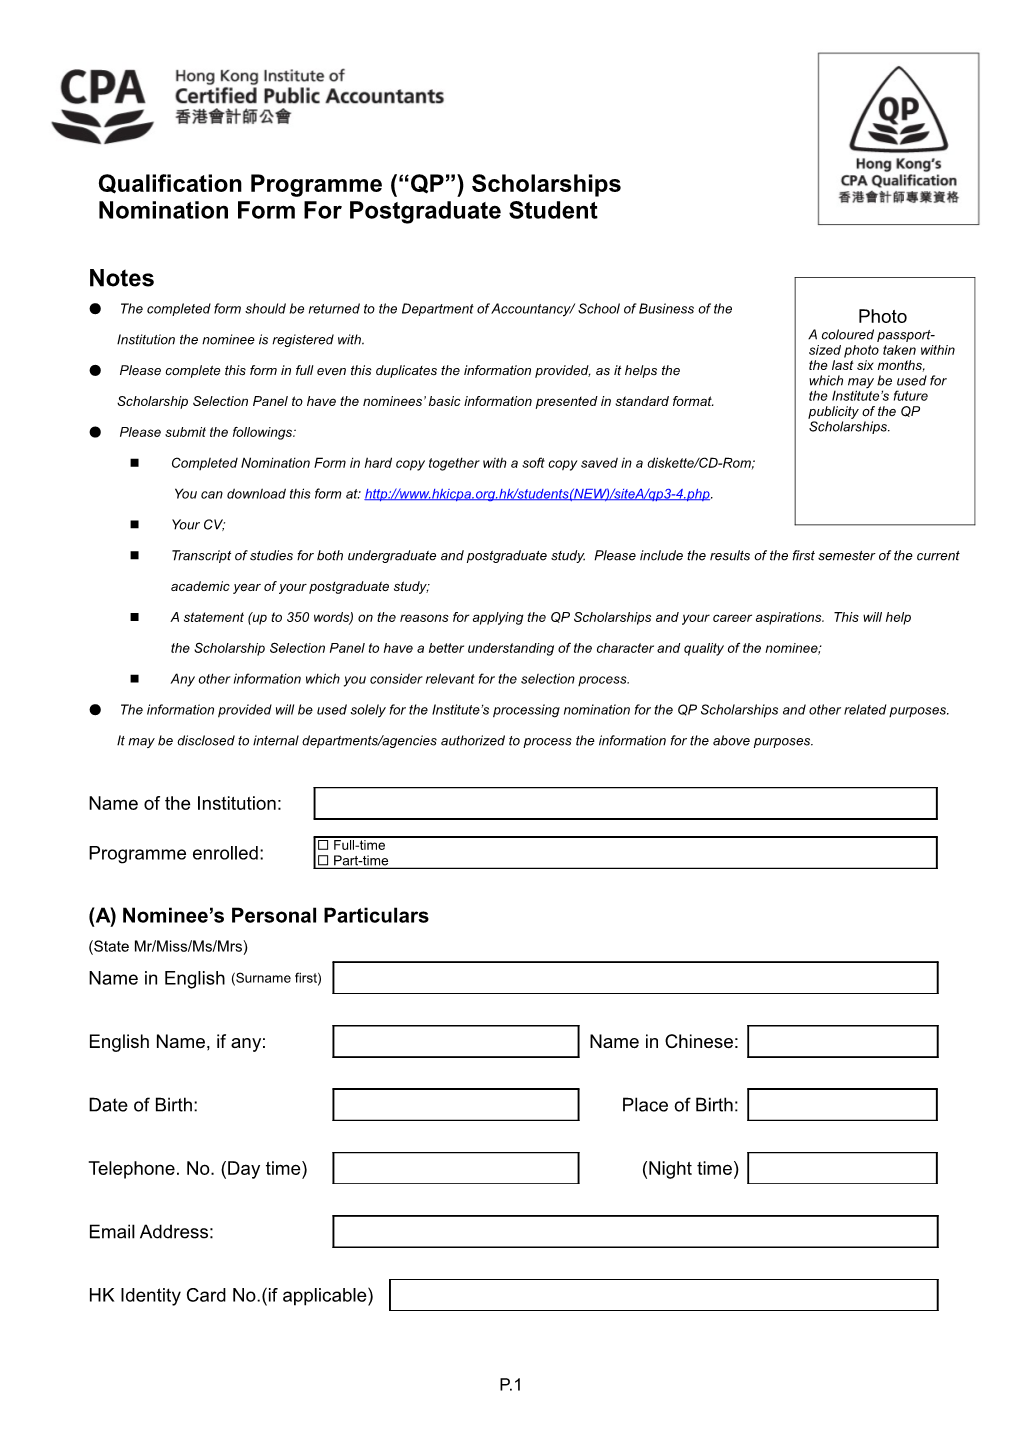 The Completed Form Should Be Returned to the Department of Accountancy/ School of Business